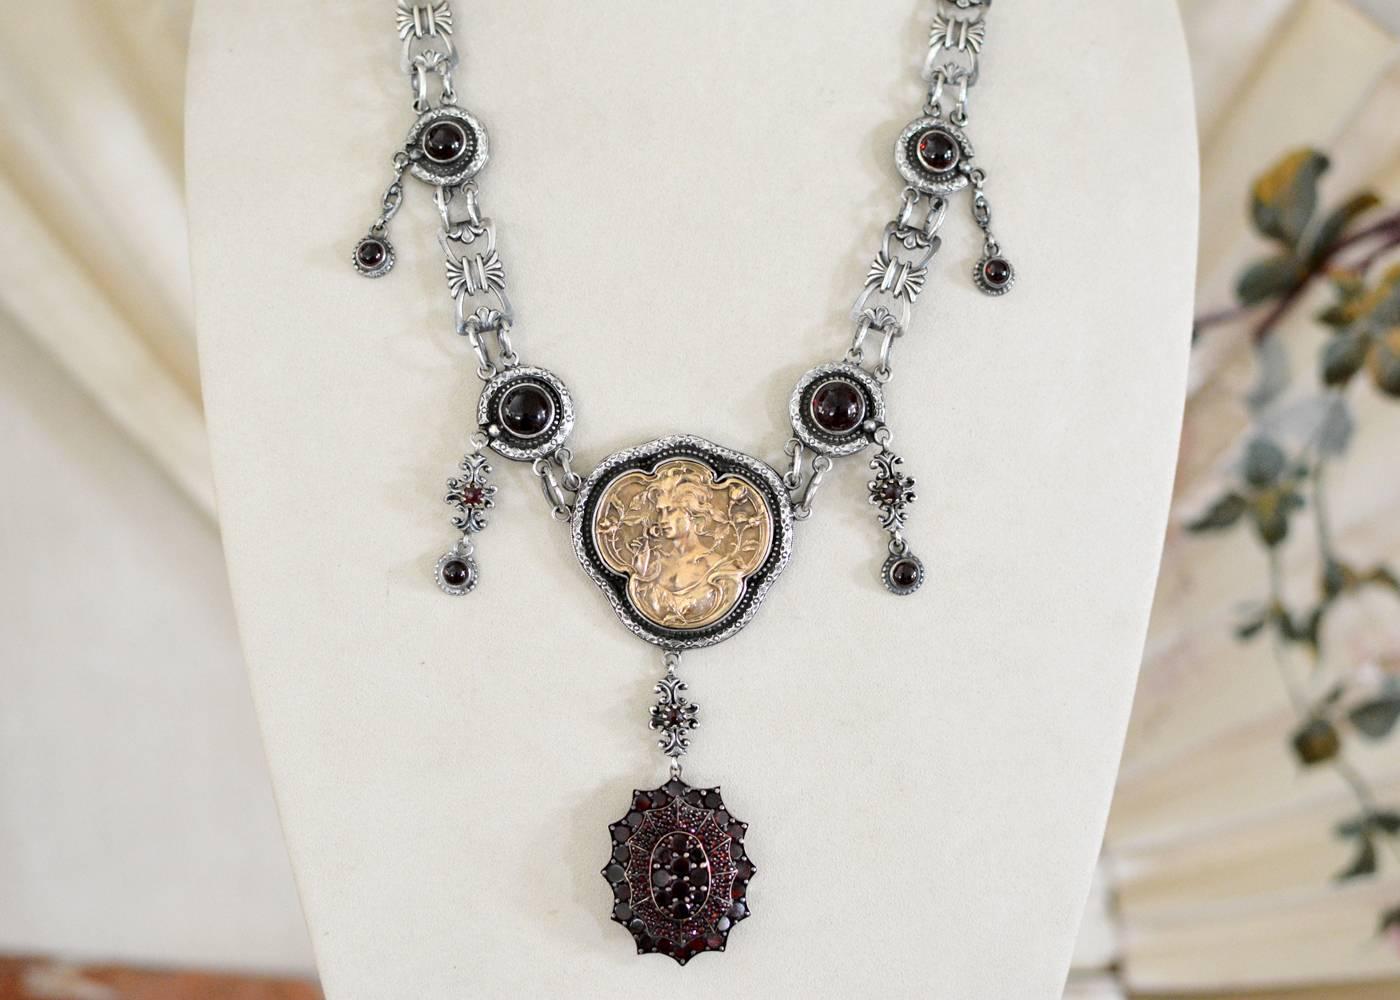 This one of a kind drop necklace features a large antique Victorian Rose Cut Garnet period locket hanging gracefully from a bronze Goddess medallion on a rose cut garnet festoon. Each antique figural link connects natural garnet cabochons, bezel